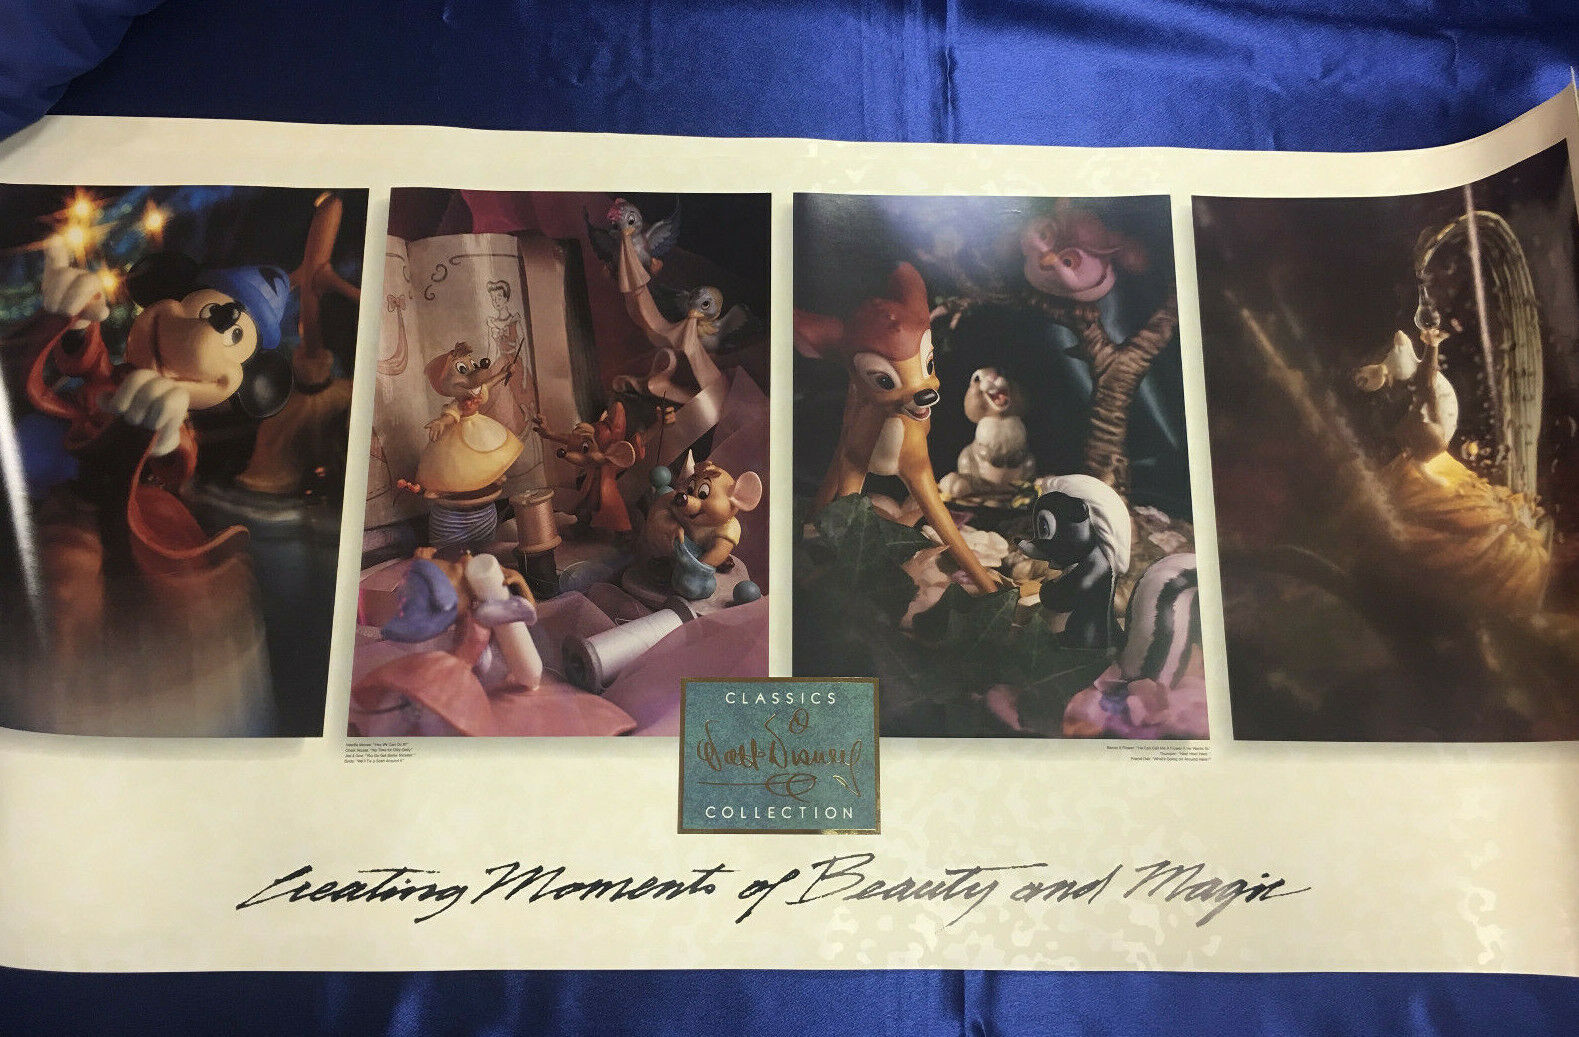 WDCC Creating Moments of Beauty & Magic Walt Disney Classics Collection Poster 